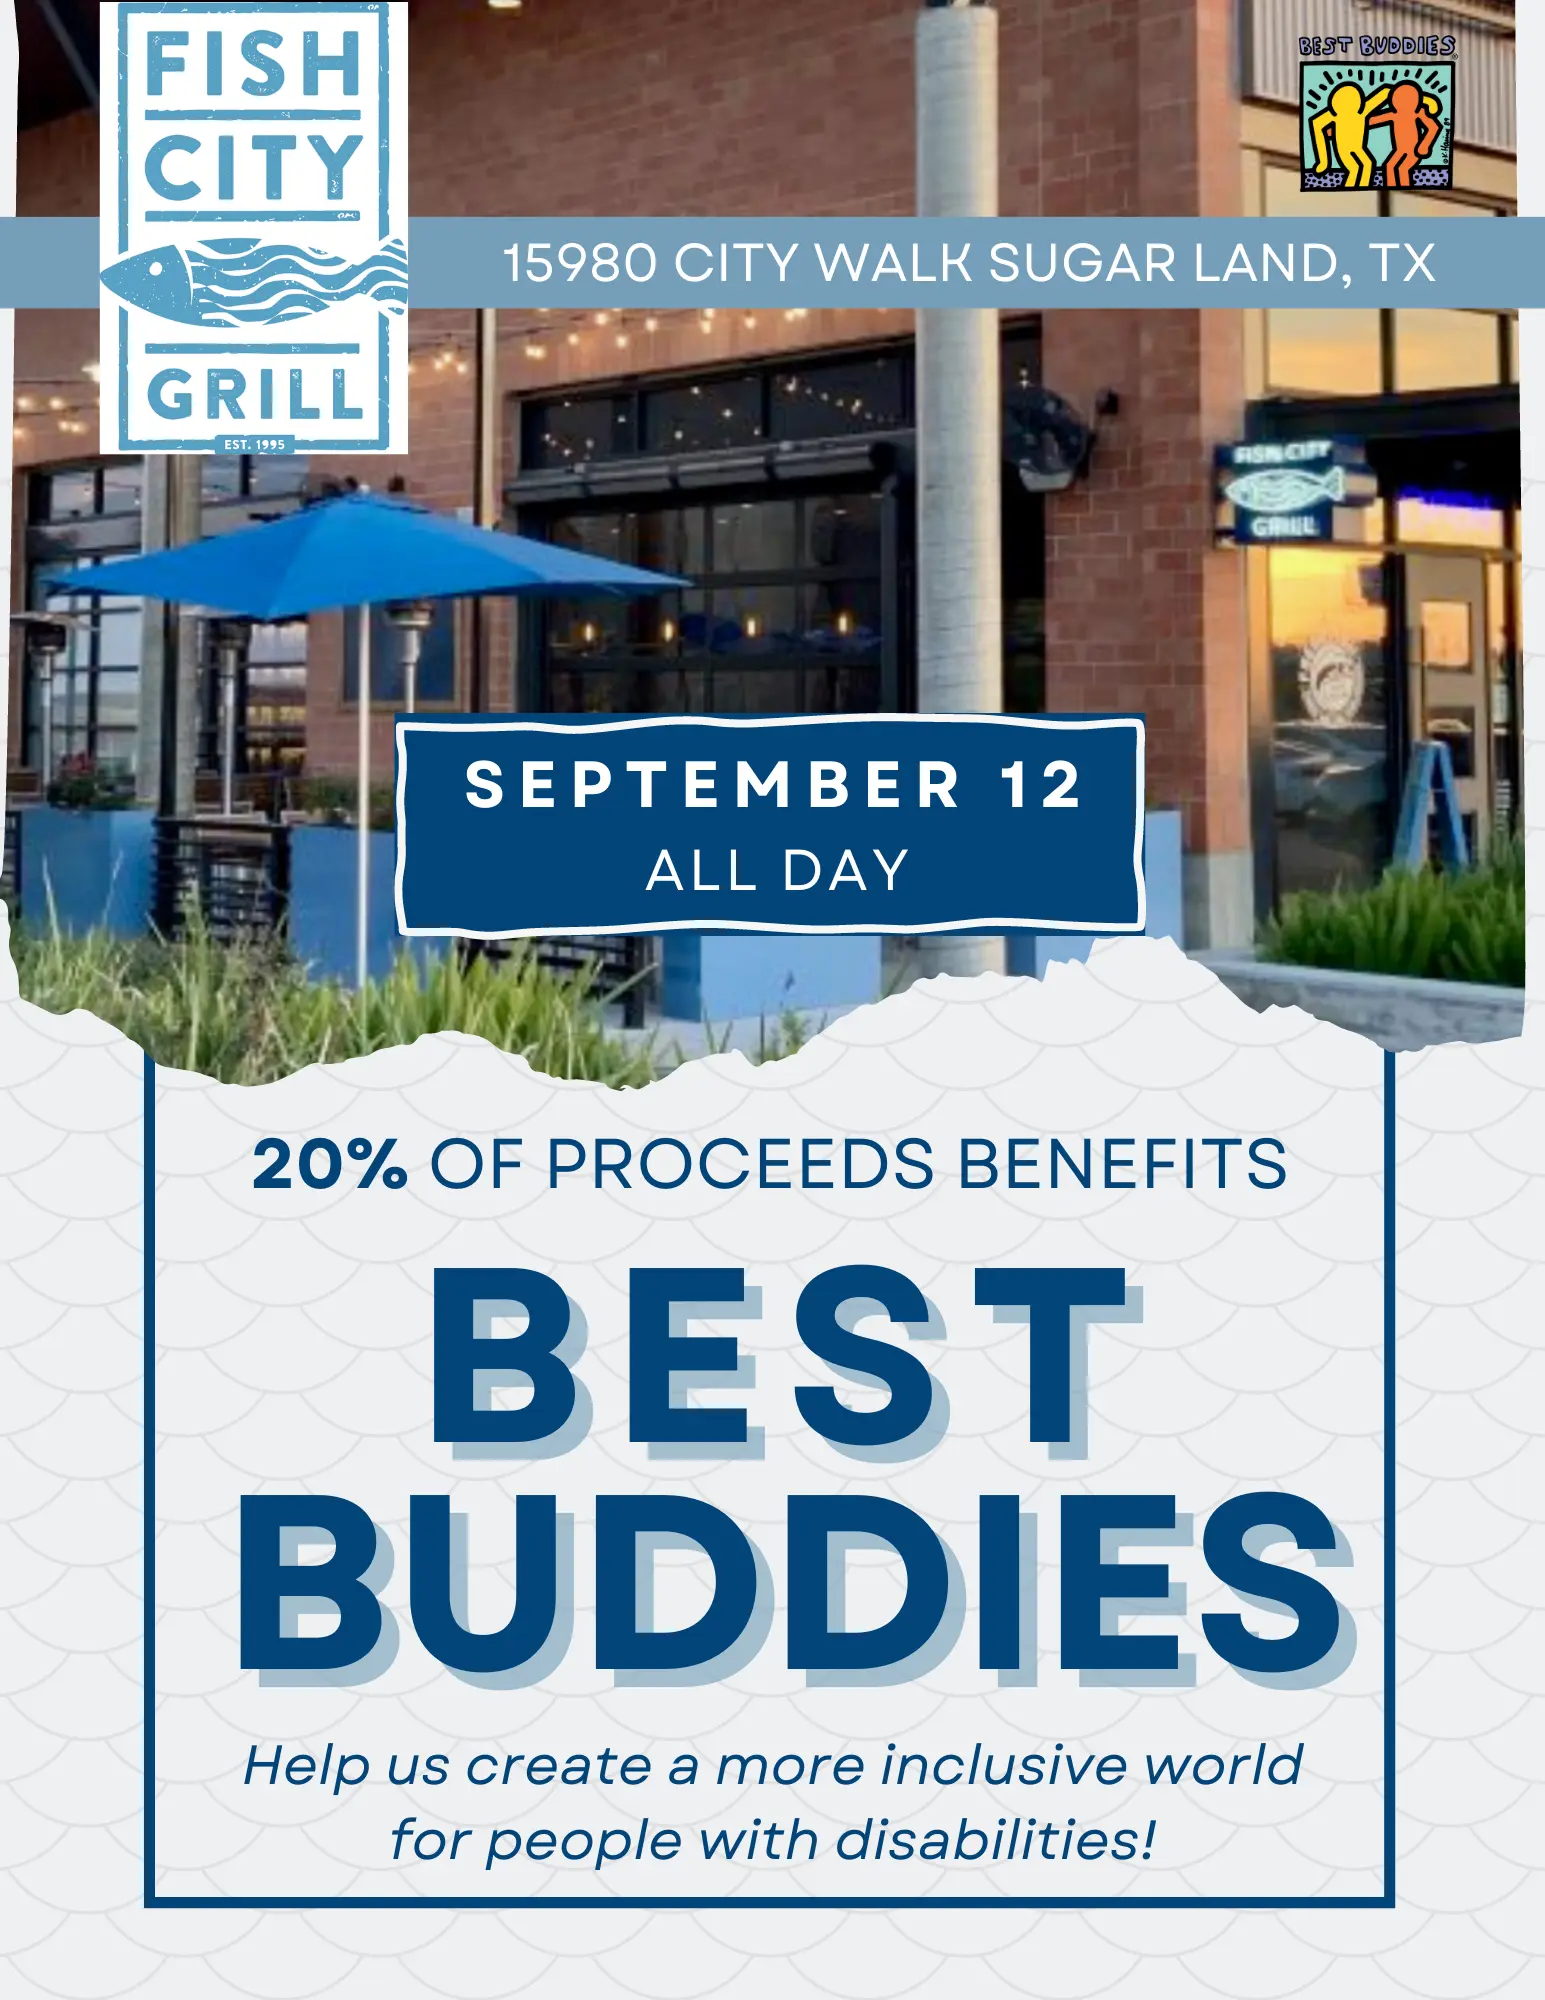 Fish City Grill Giveback Flyer